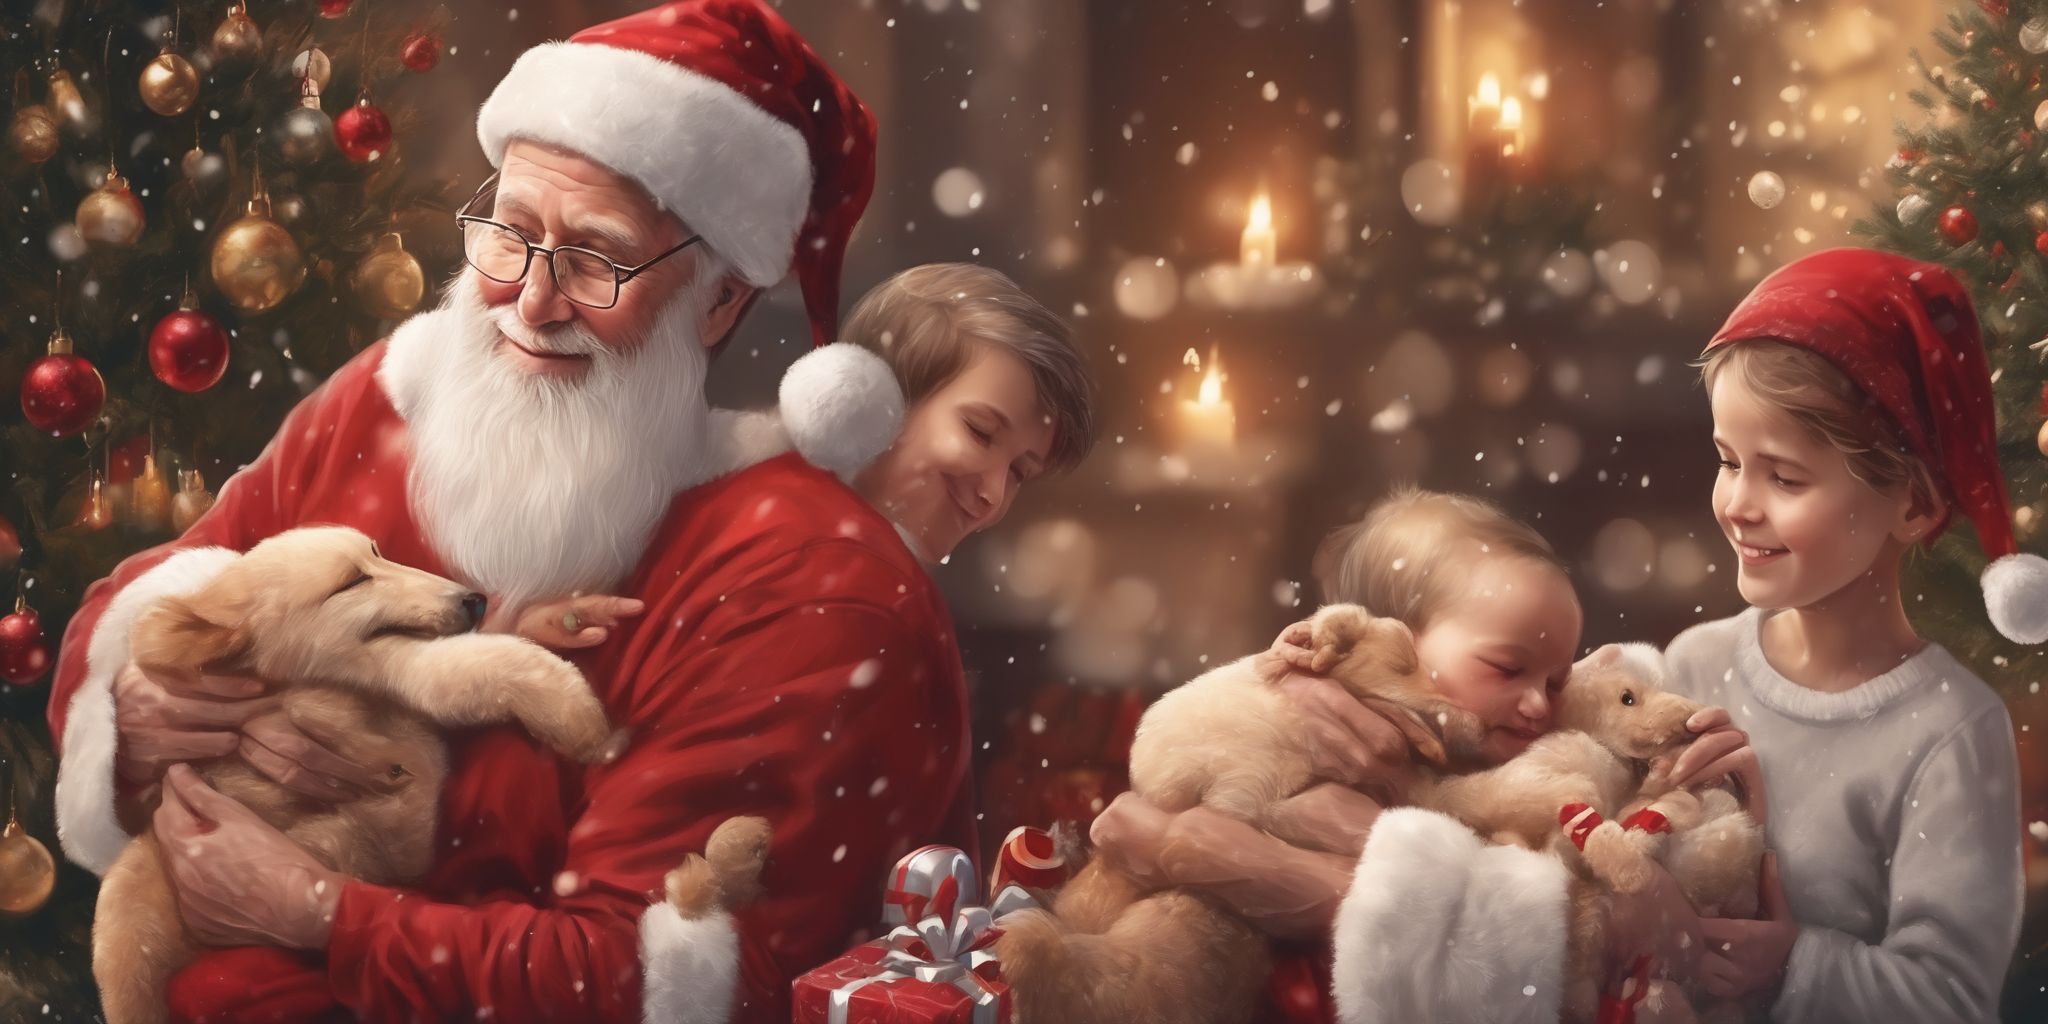 Warm compassion in realistic Christmas style